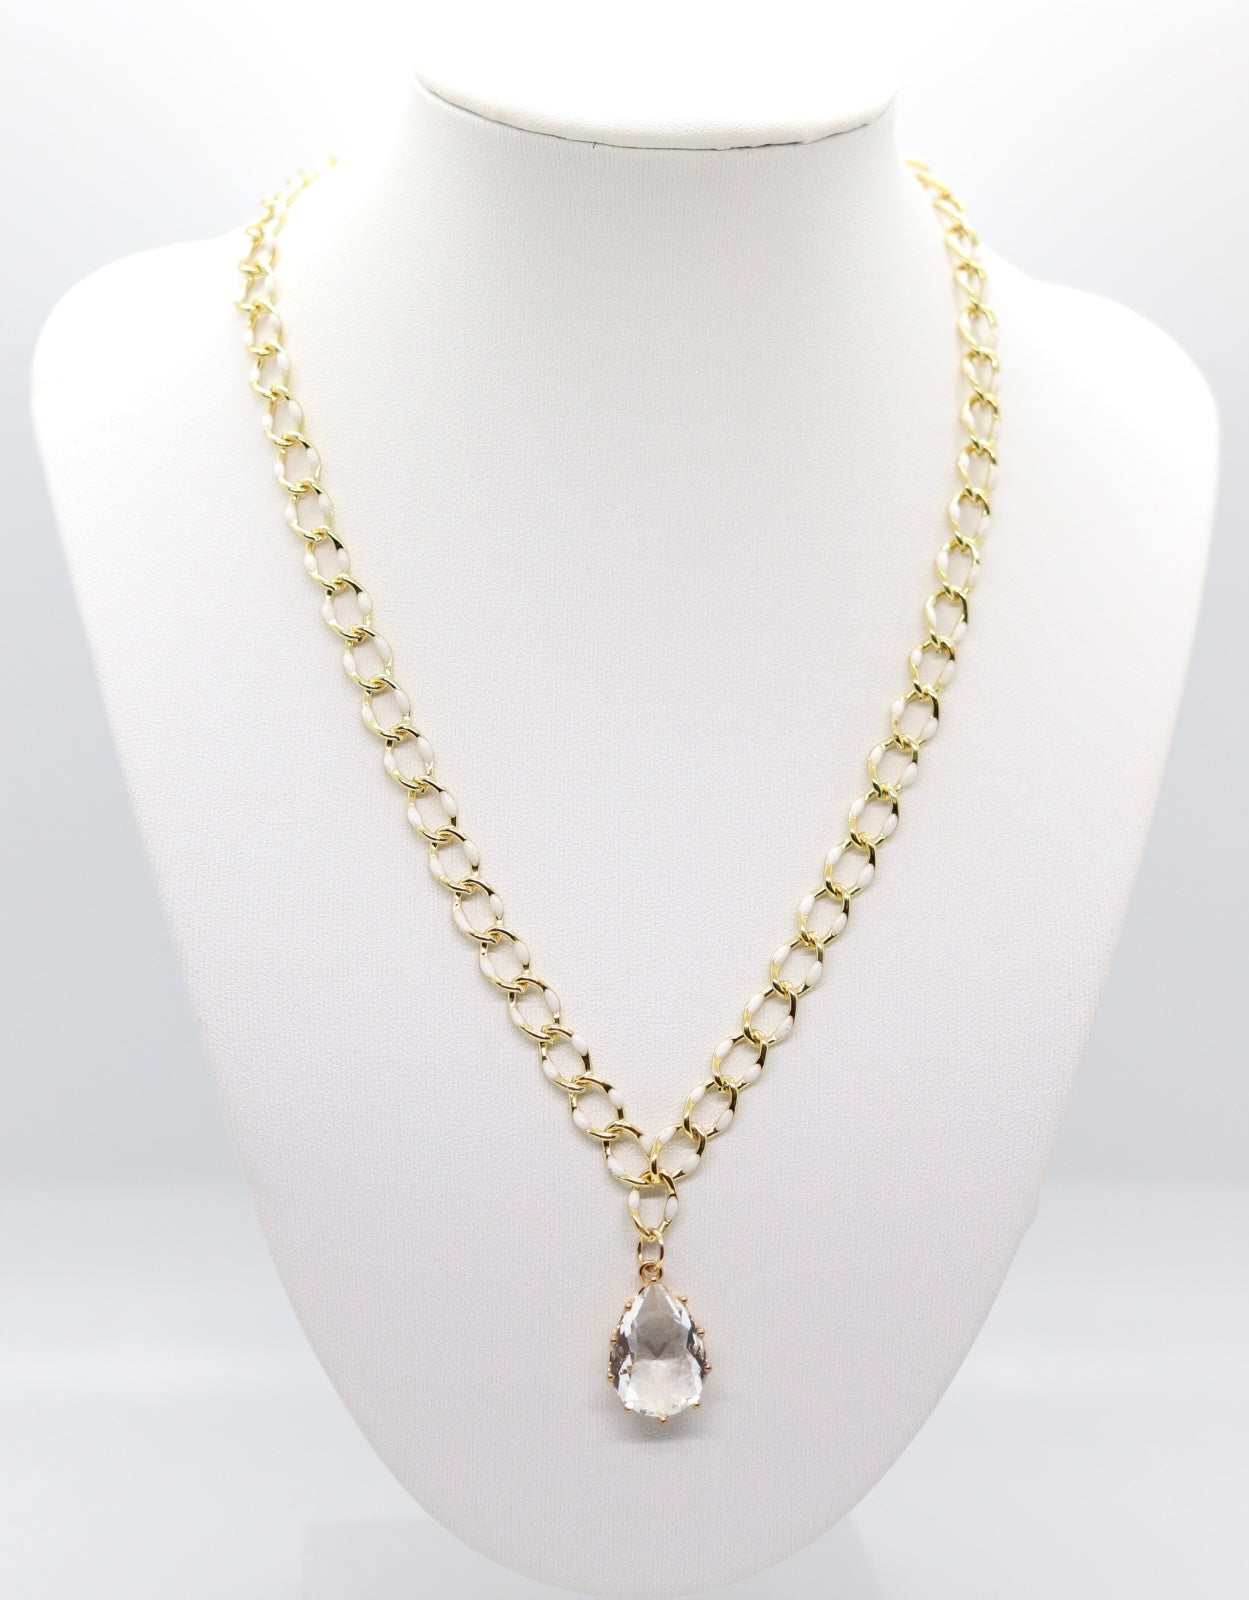 Beautiful White Tipped Chain Necklace with Clear Teardrop Pendant